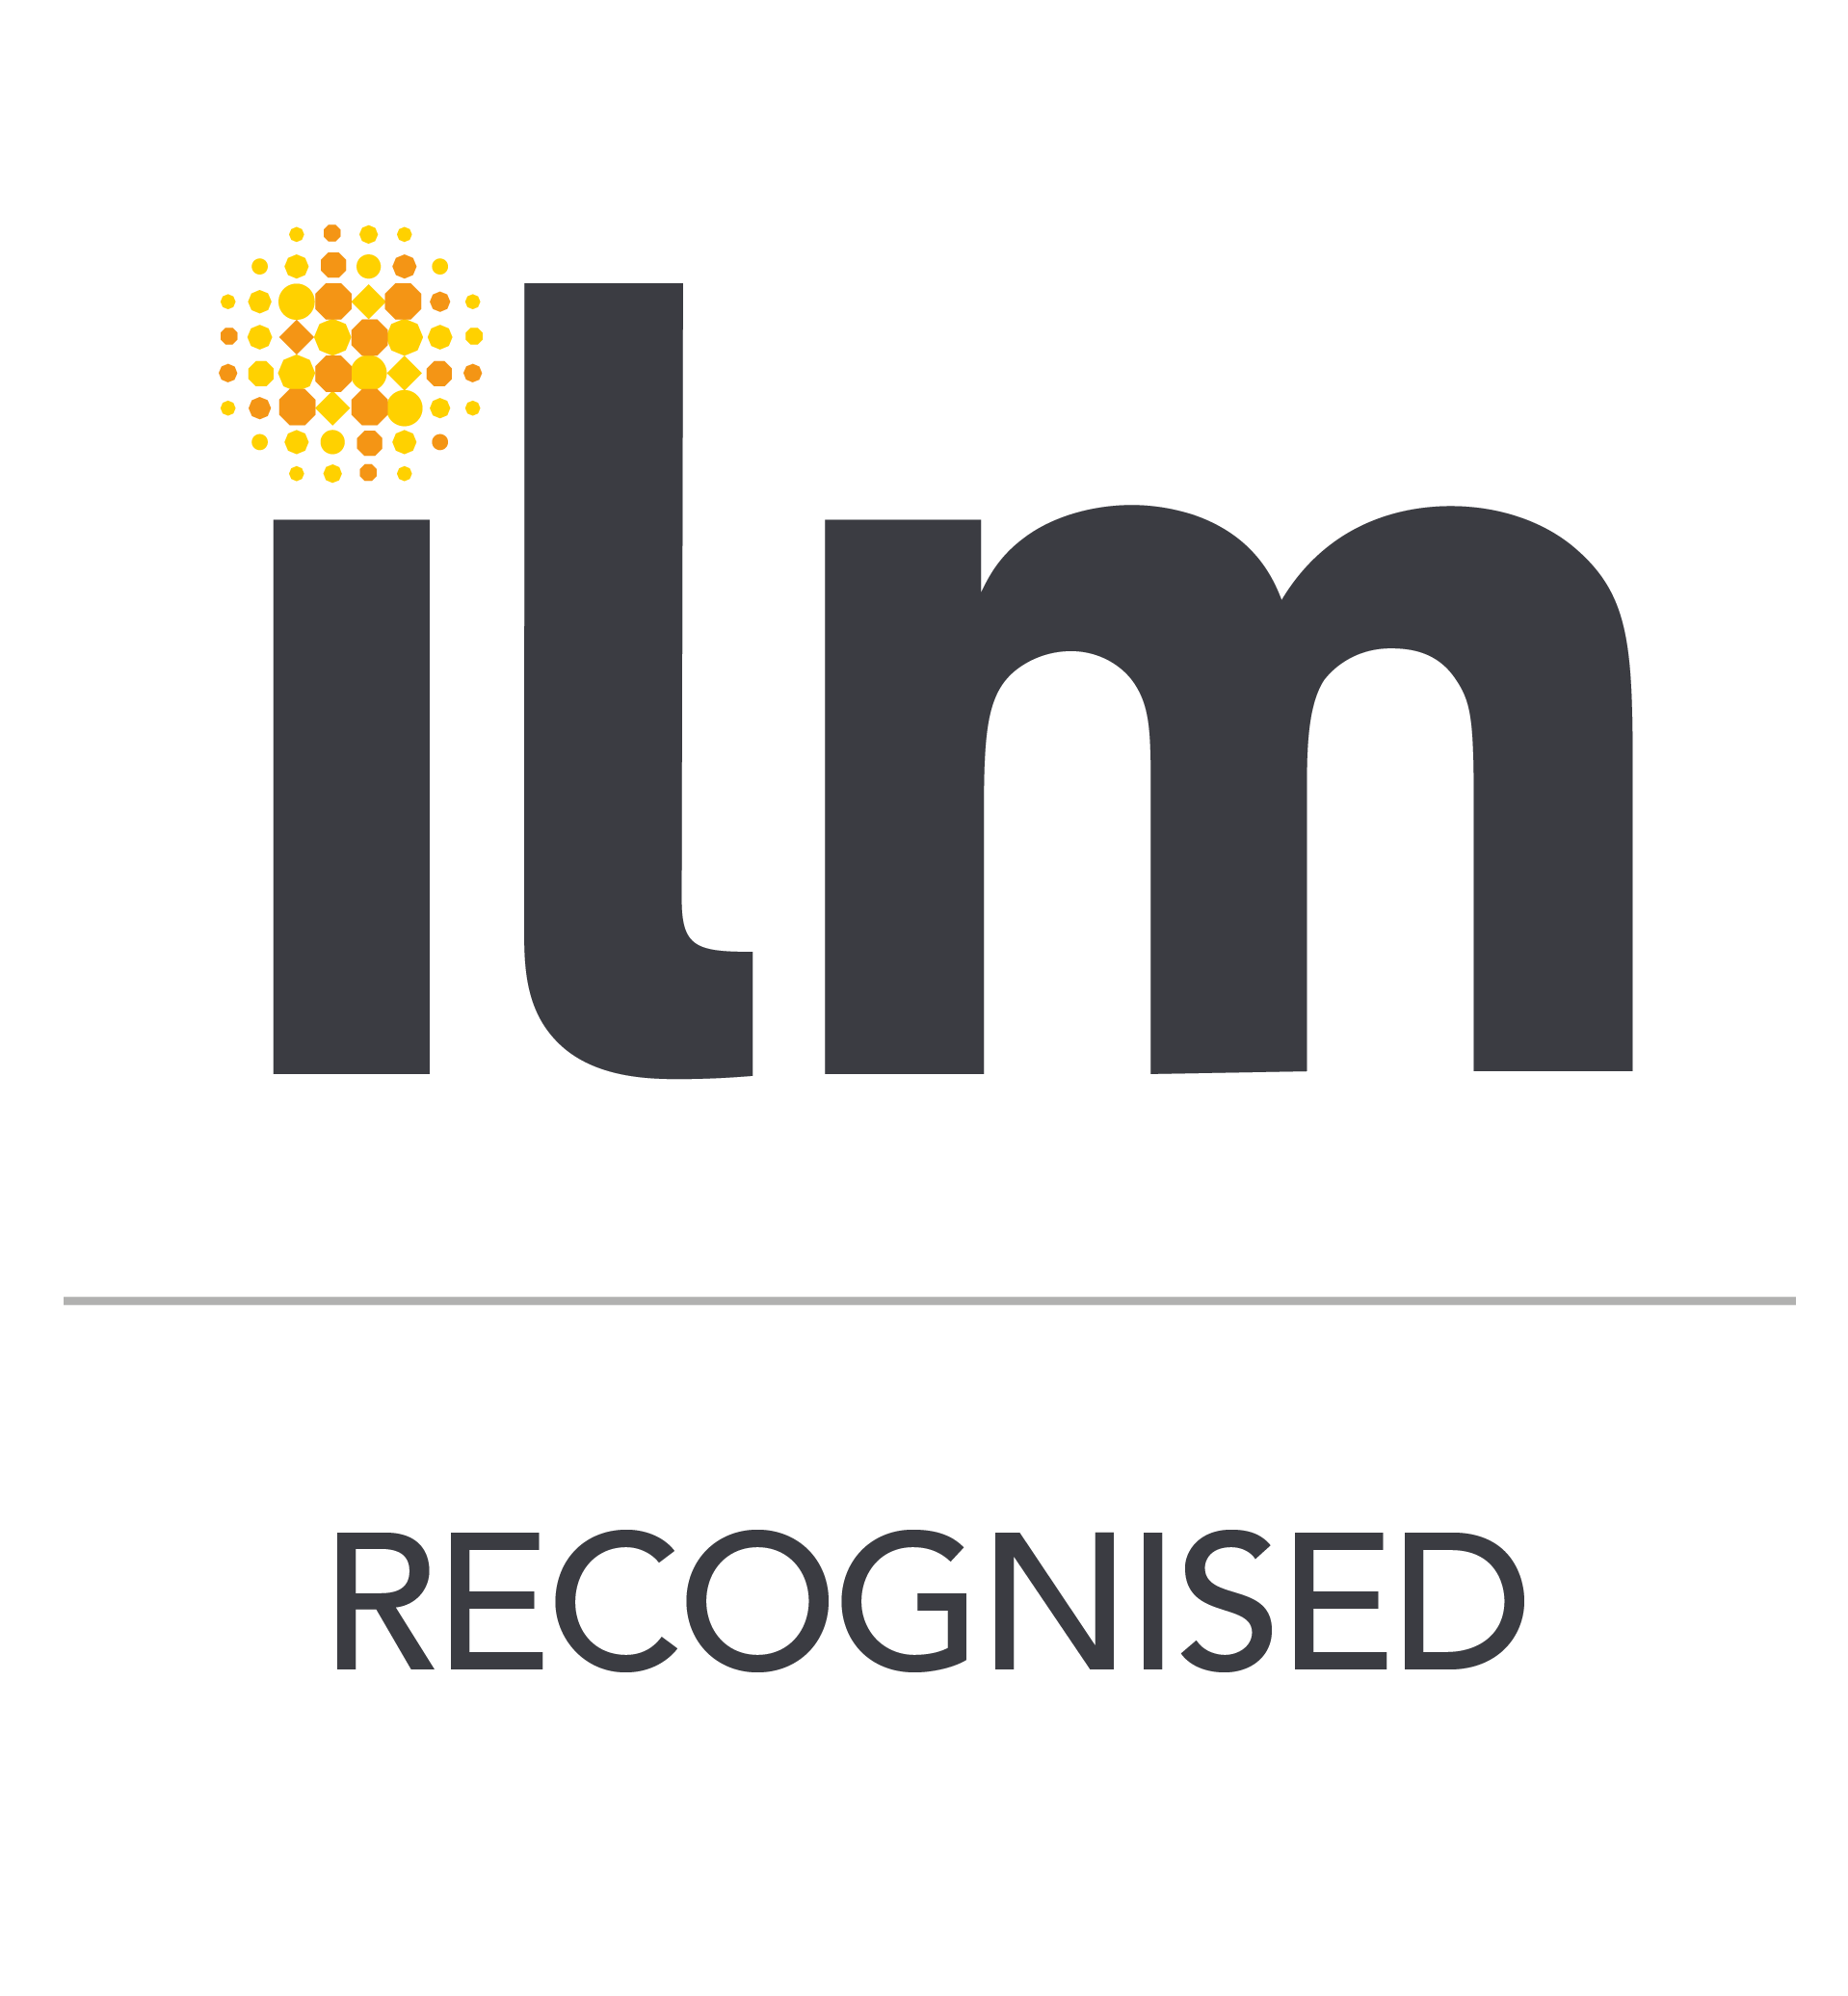 ILM (City & Guilds Group)